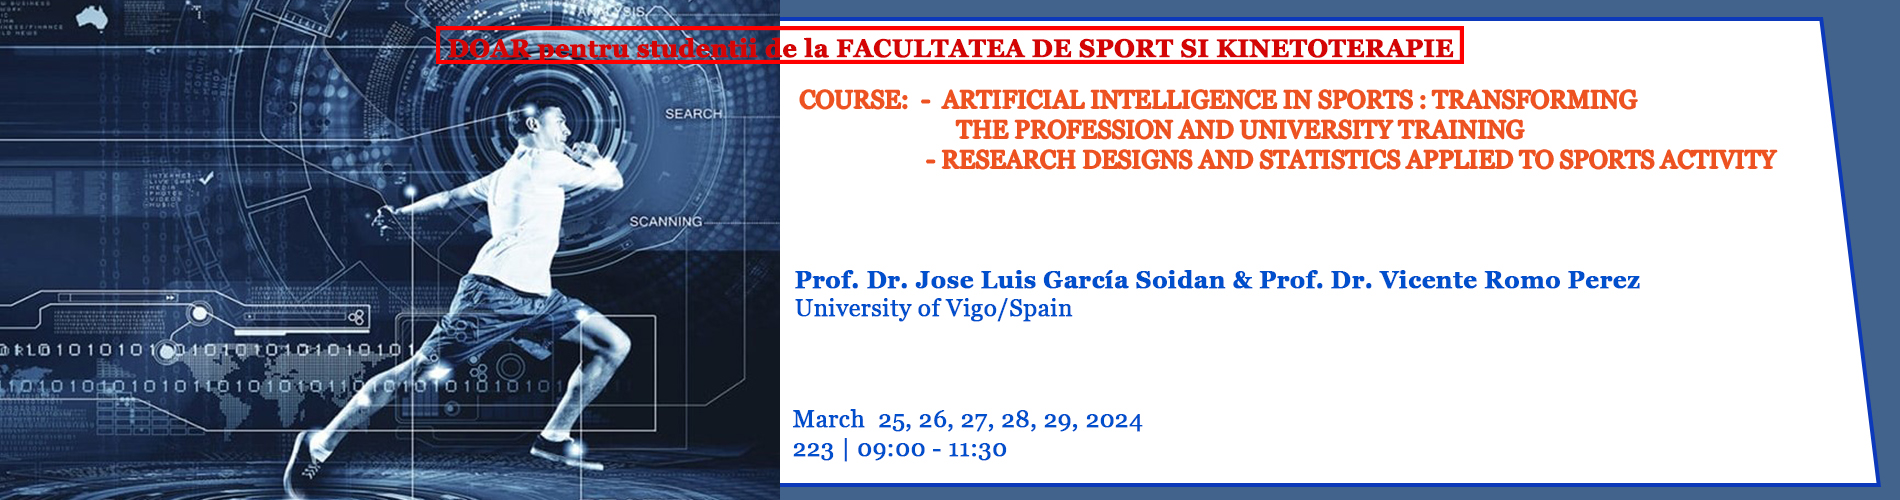 20240325-29_-_new_trends_in_sports_research_and_artificial_intelligence_in_sports_